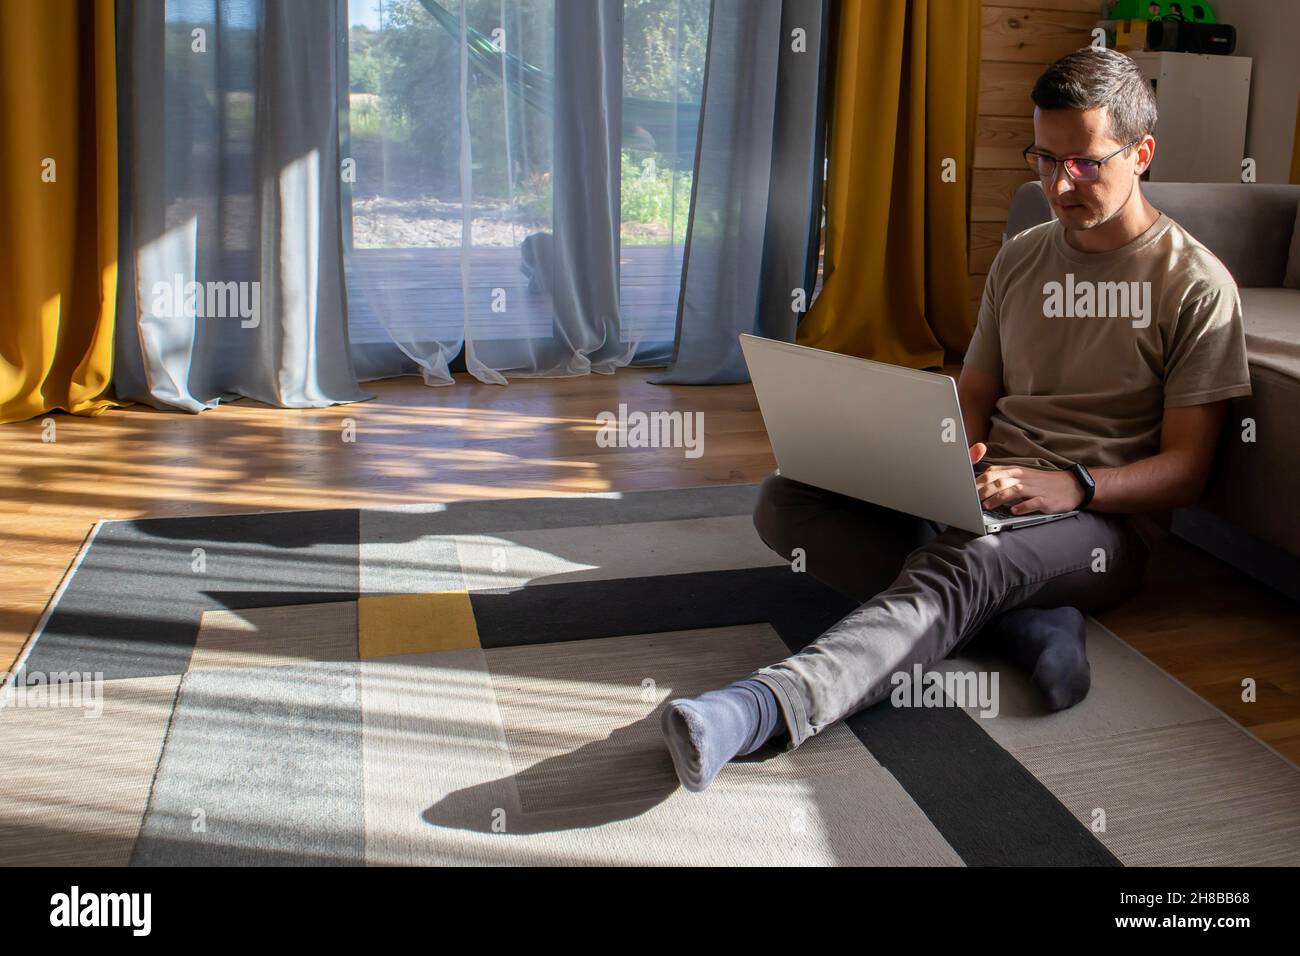 A guy in casual clothes is working on the floor in a sunny loft apartment Stock Photo